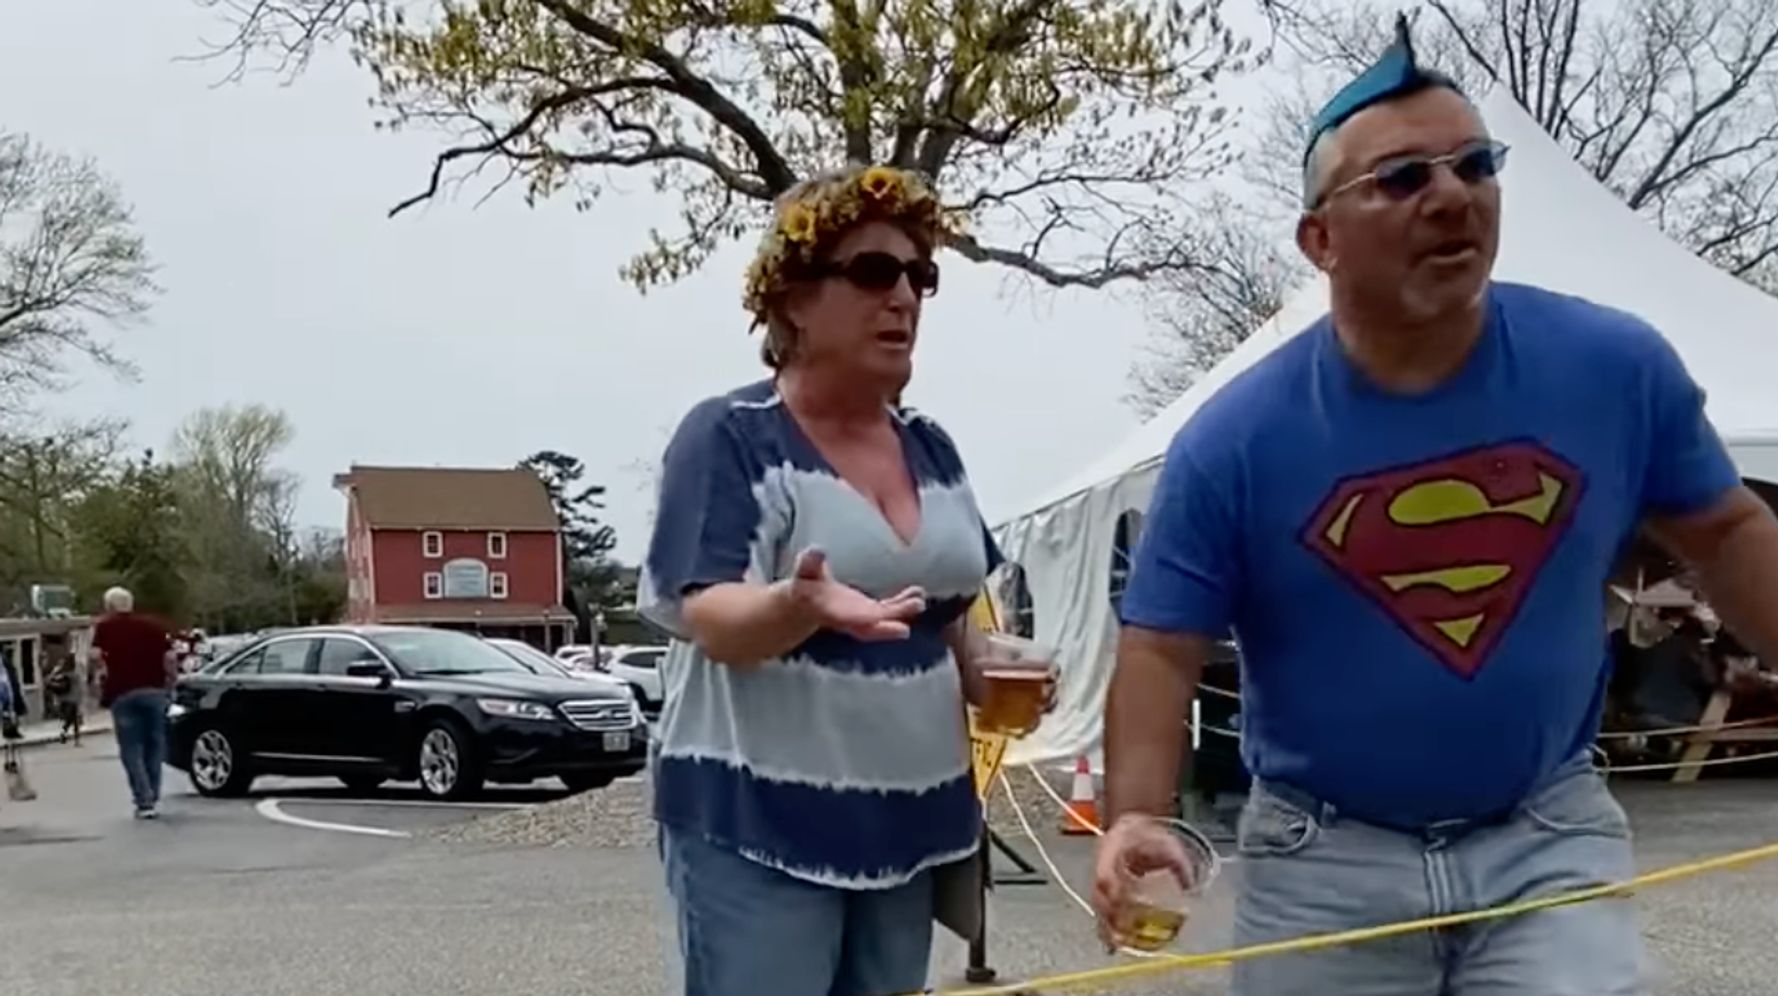 NJ Educator Who Threw Beer In Transphobic Viral Video Claims Harassment